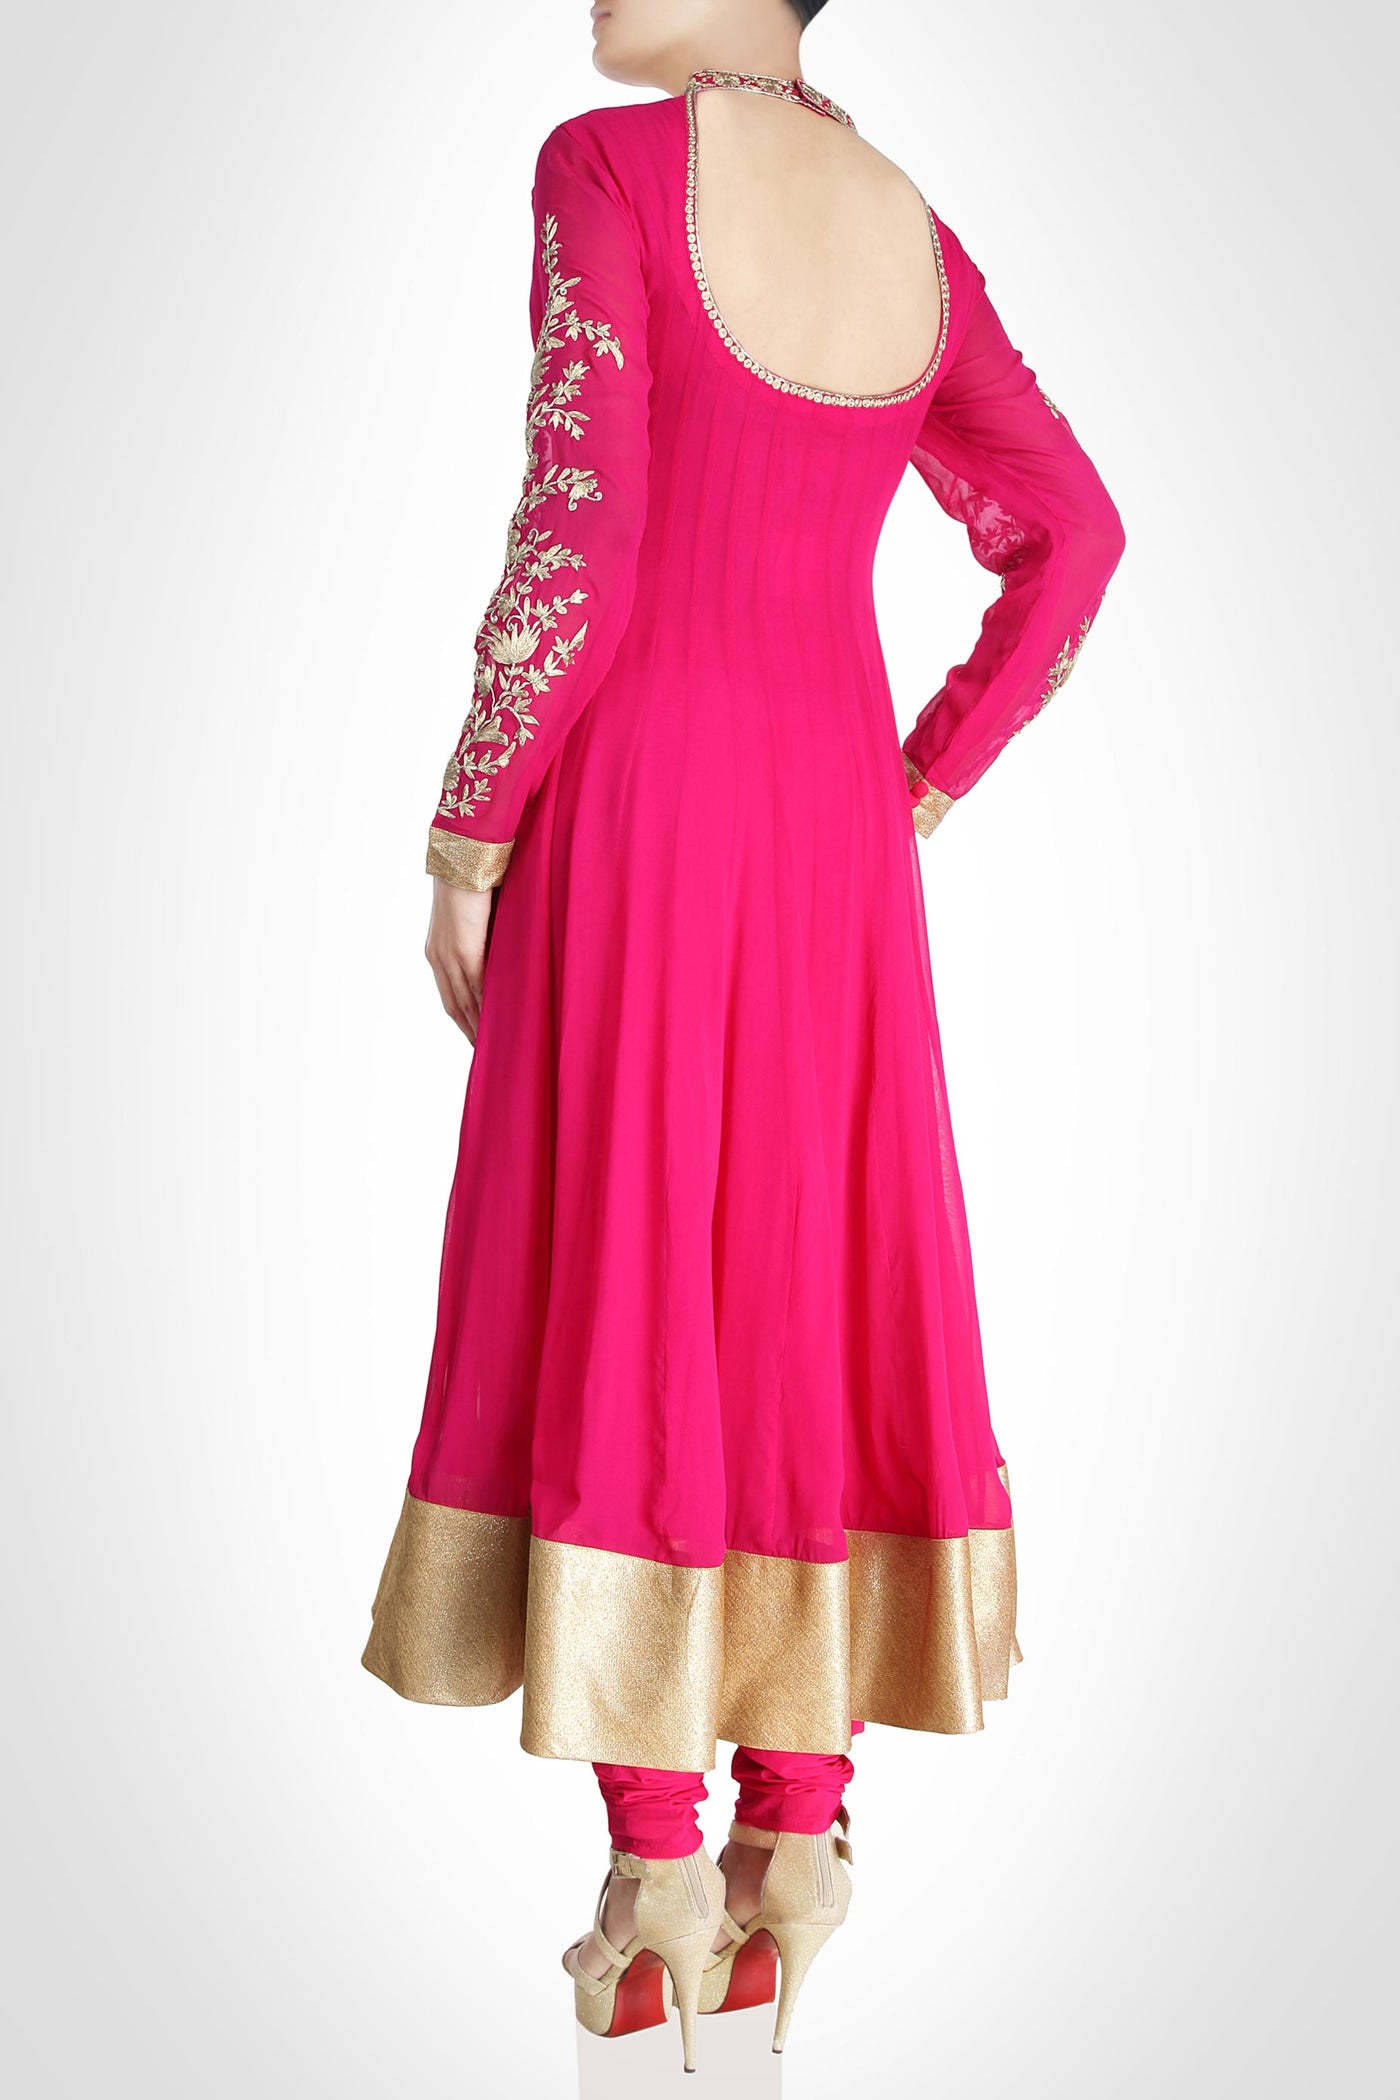 GOTA SAINI ANARKALI COLLECTION: PINK - Indian Clothing in Denver, CO, Aurora, CO, Boulder, CO, Fort Collins, CO, Colorado Springs, CO, Parker, CO, Highlands Ranch, CO, Cherry Creek, CO, Centennial, CO, and Longmont, CO. Nationwide shipping USA - India Fashion X